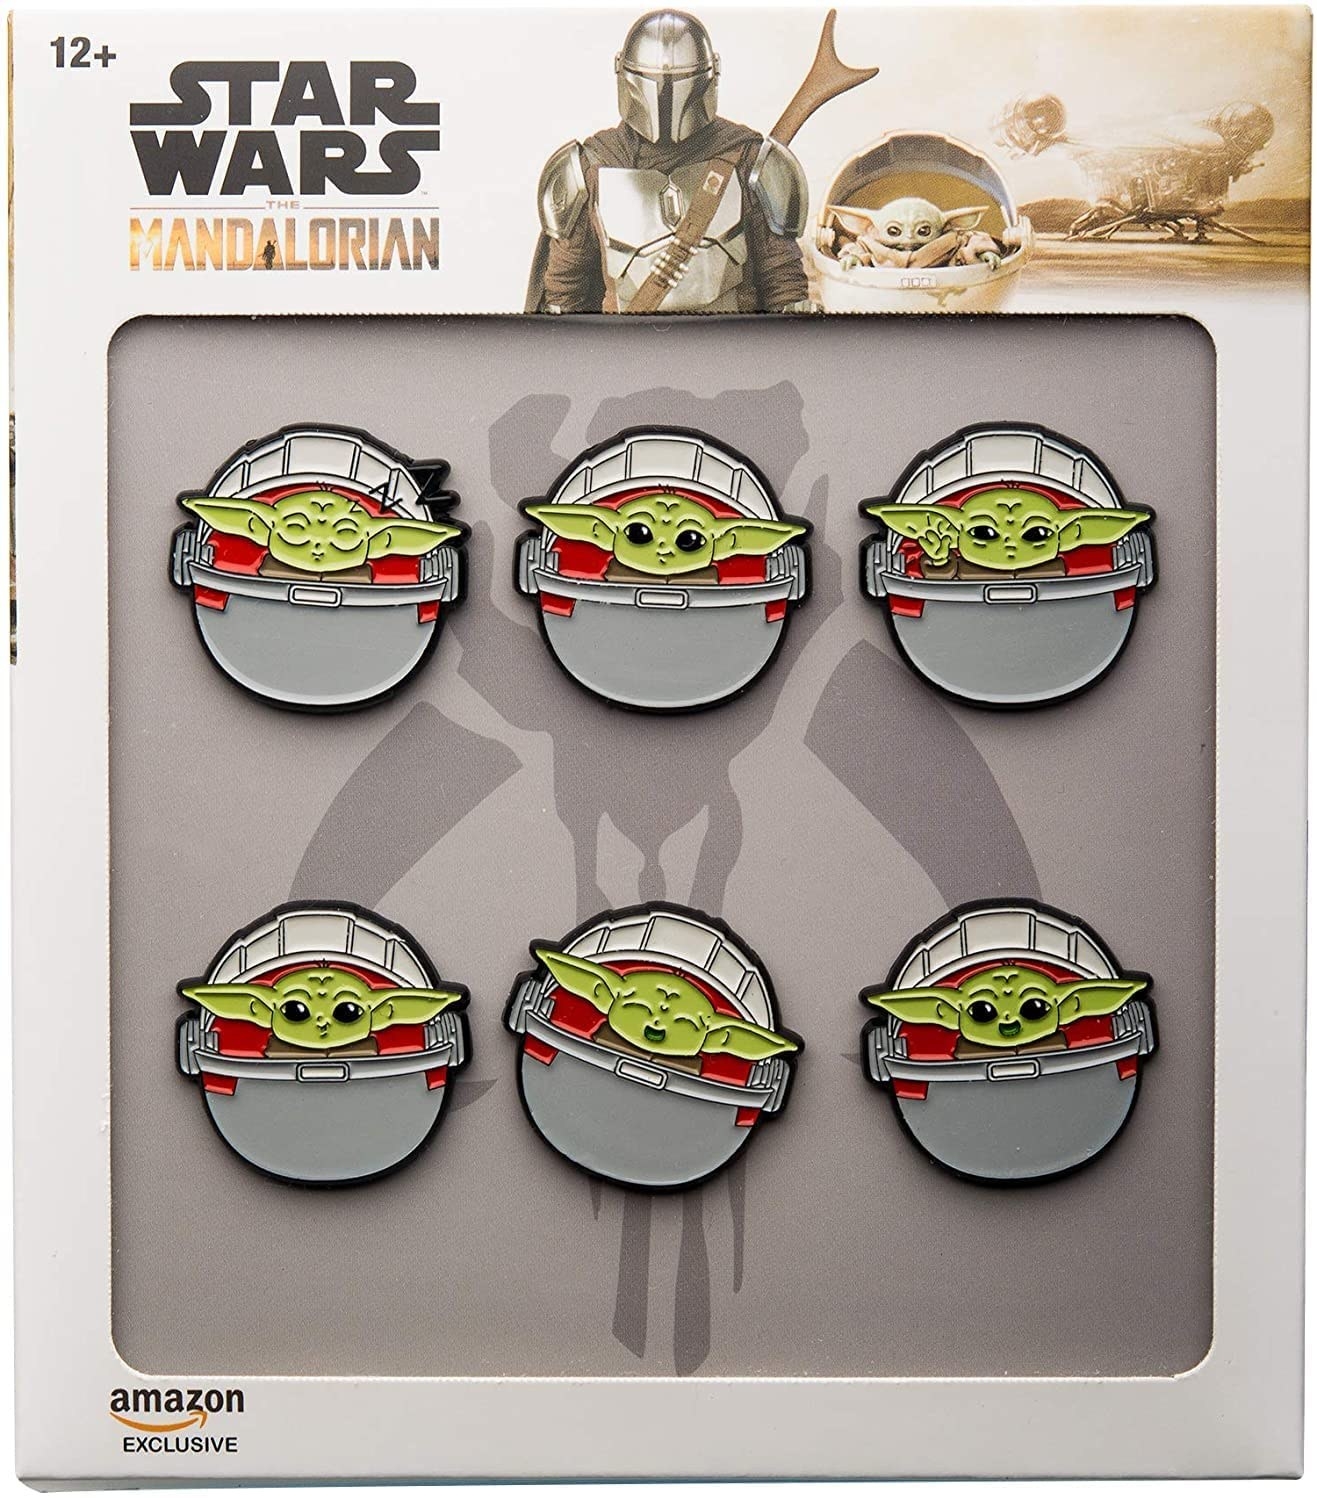 enamel pins of Baby Yoda making different faces